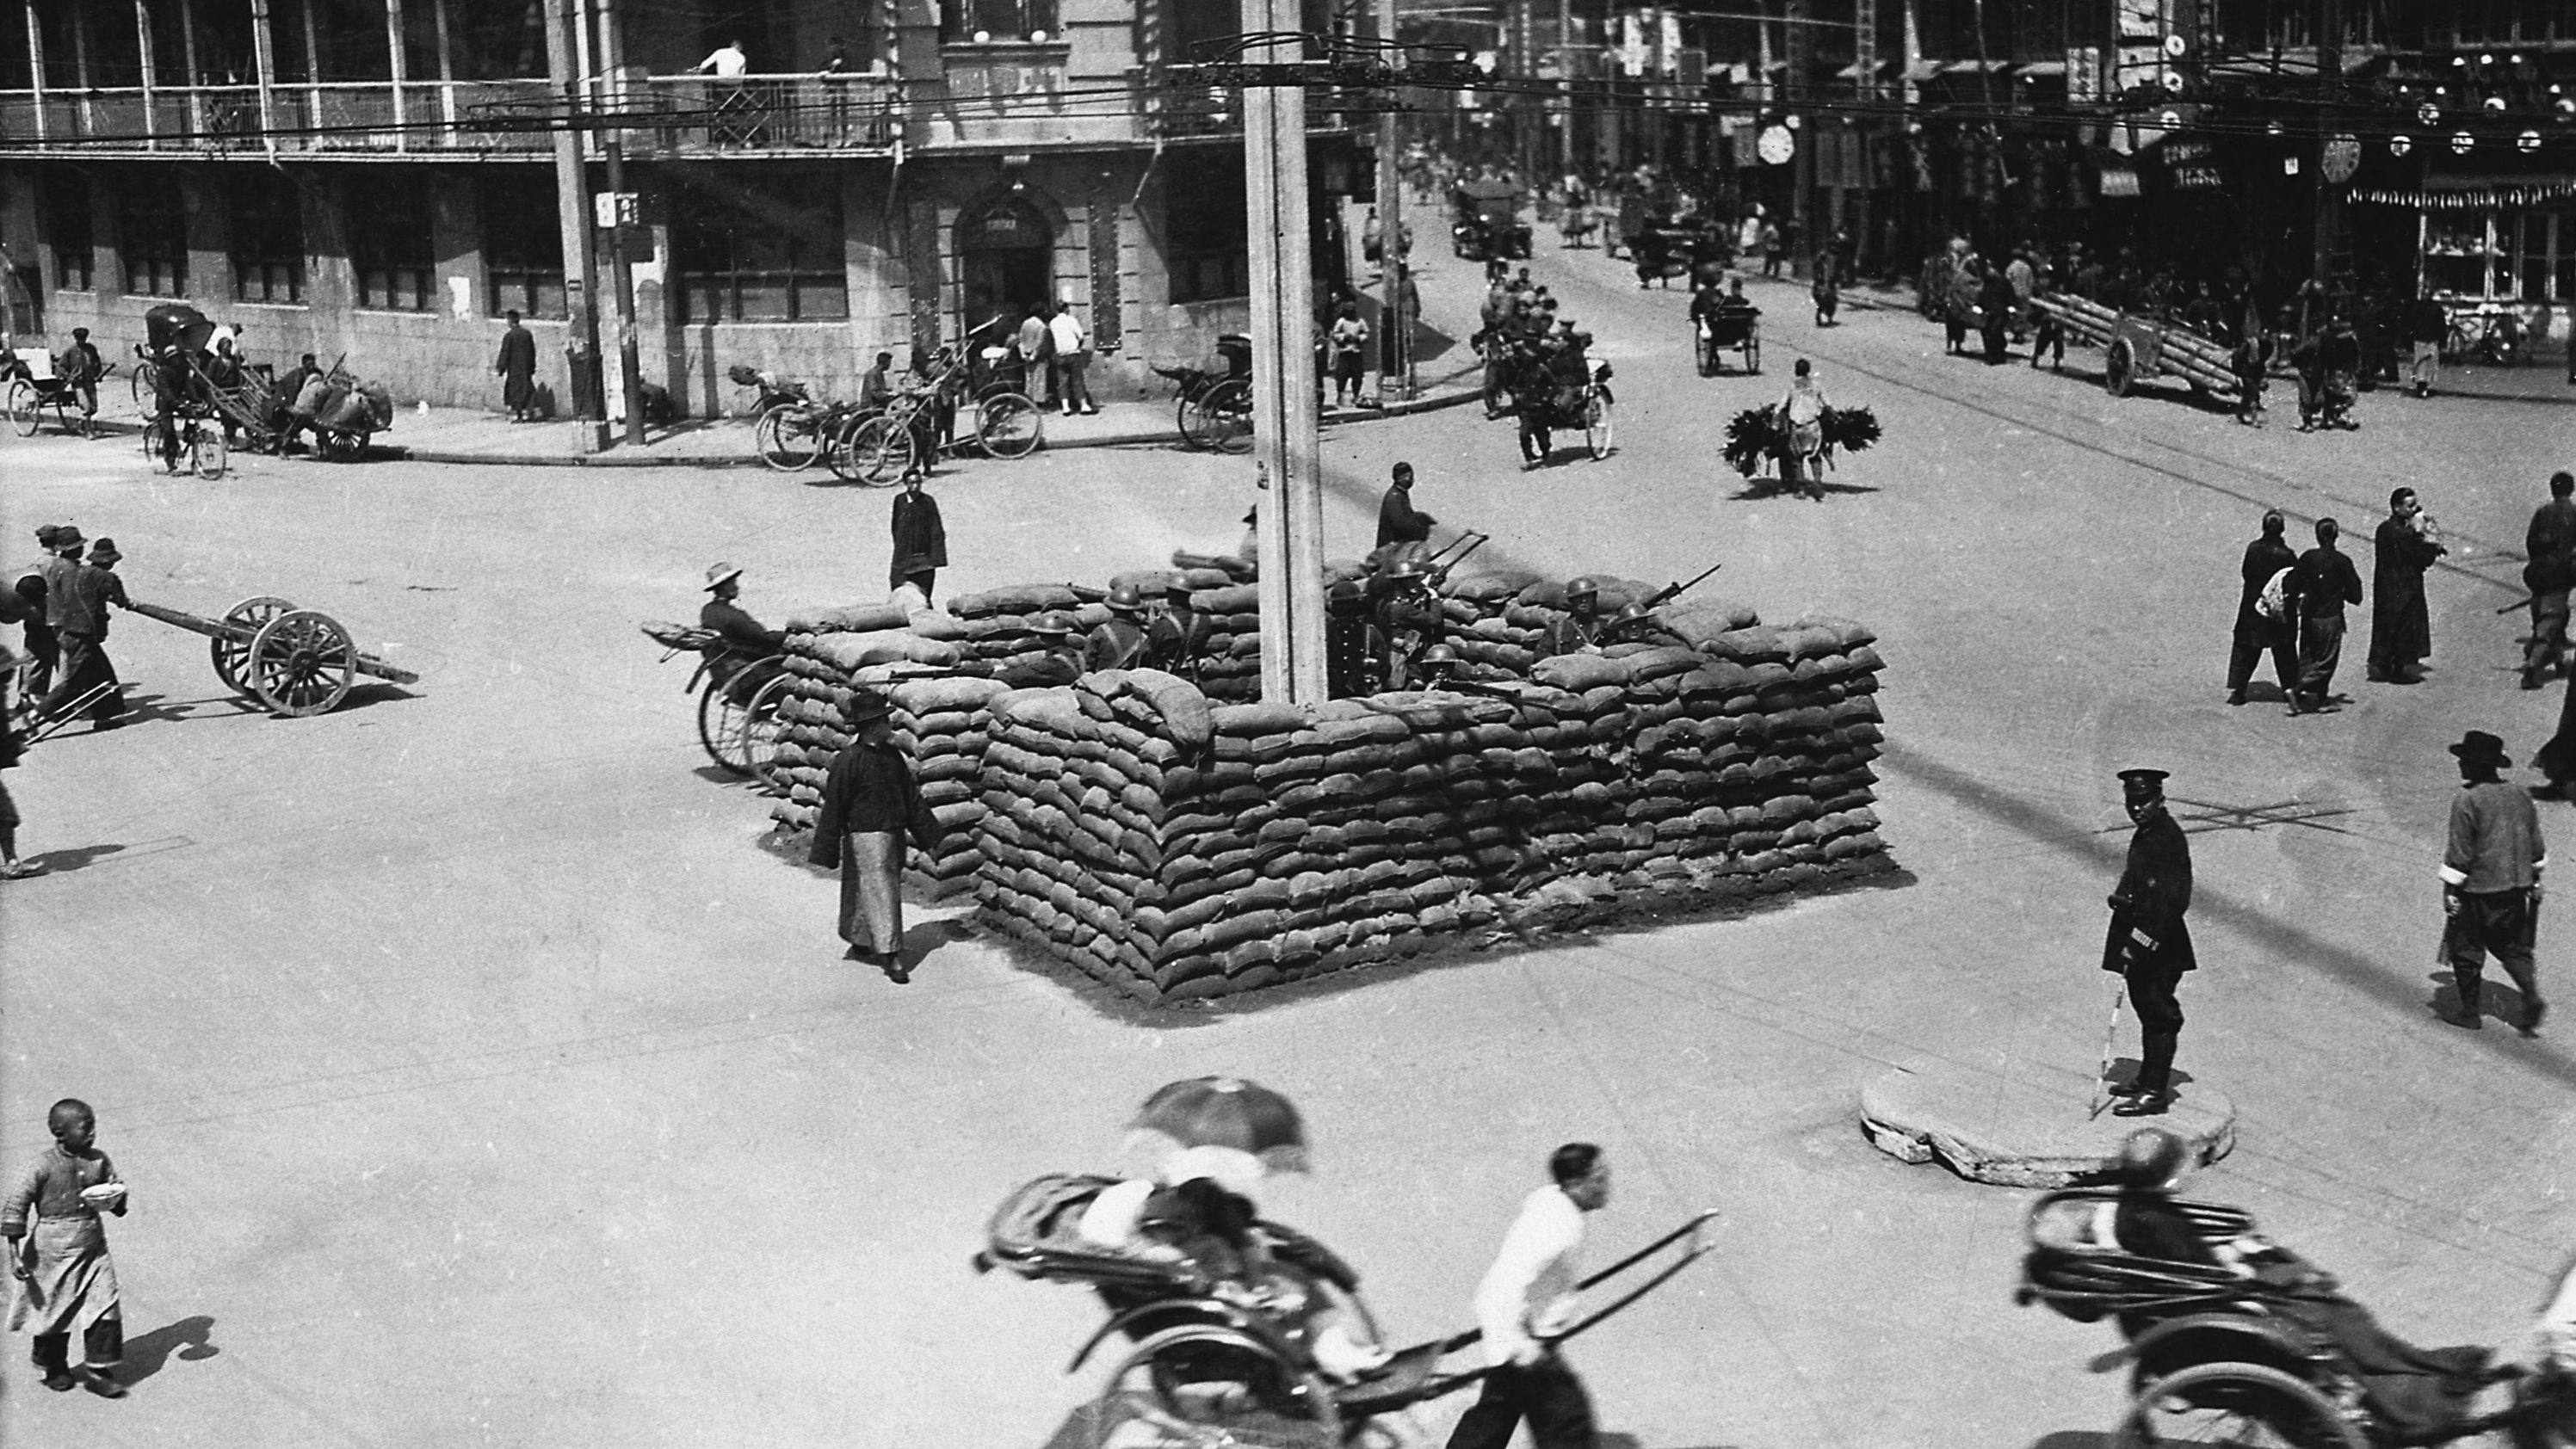 British troops guard a barricade on a street in Shanghai, China, in 1927. That year, the Kuomintang, or Chinese Nationalist Party, purged the Communist party in Shanghai, leading to a civil war between the Communists and Nationalists that would last more than 20 years. Thousands died in what the Nationalists called the "cleansing of the party." 